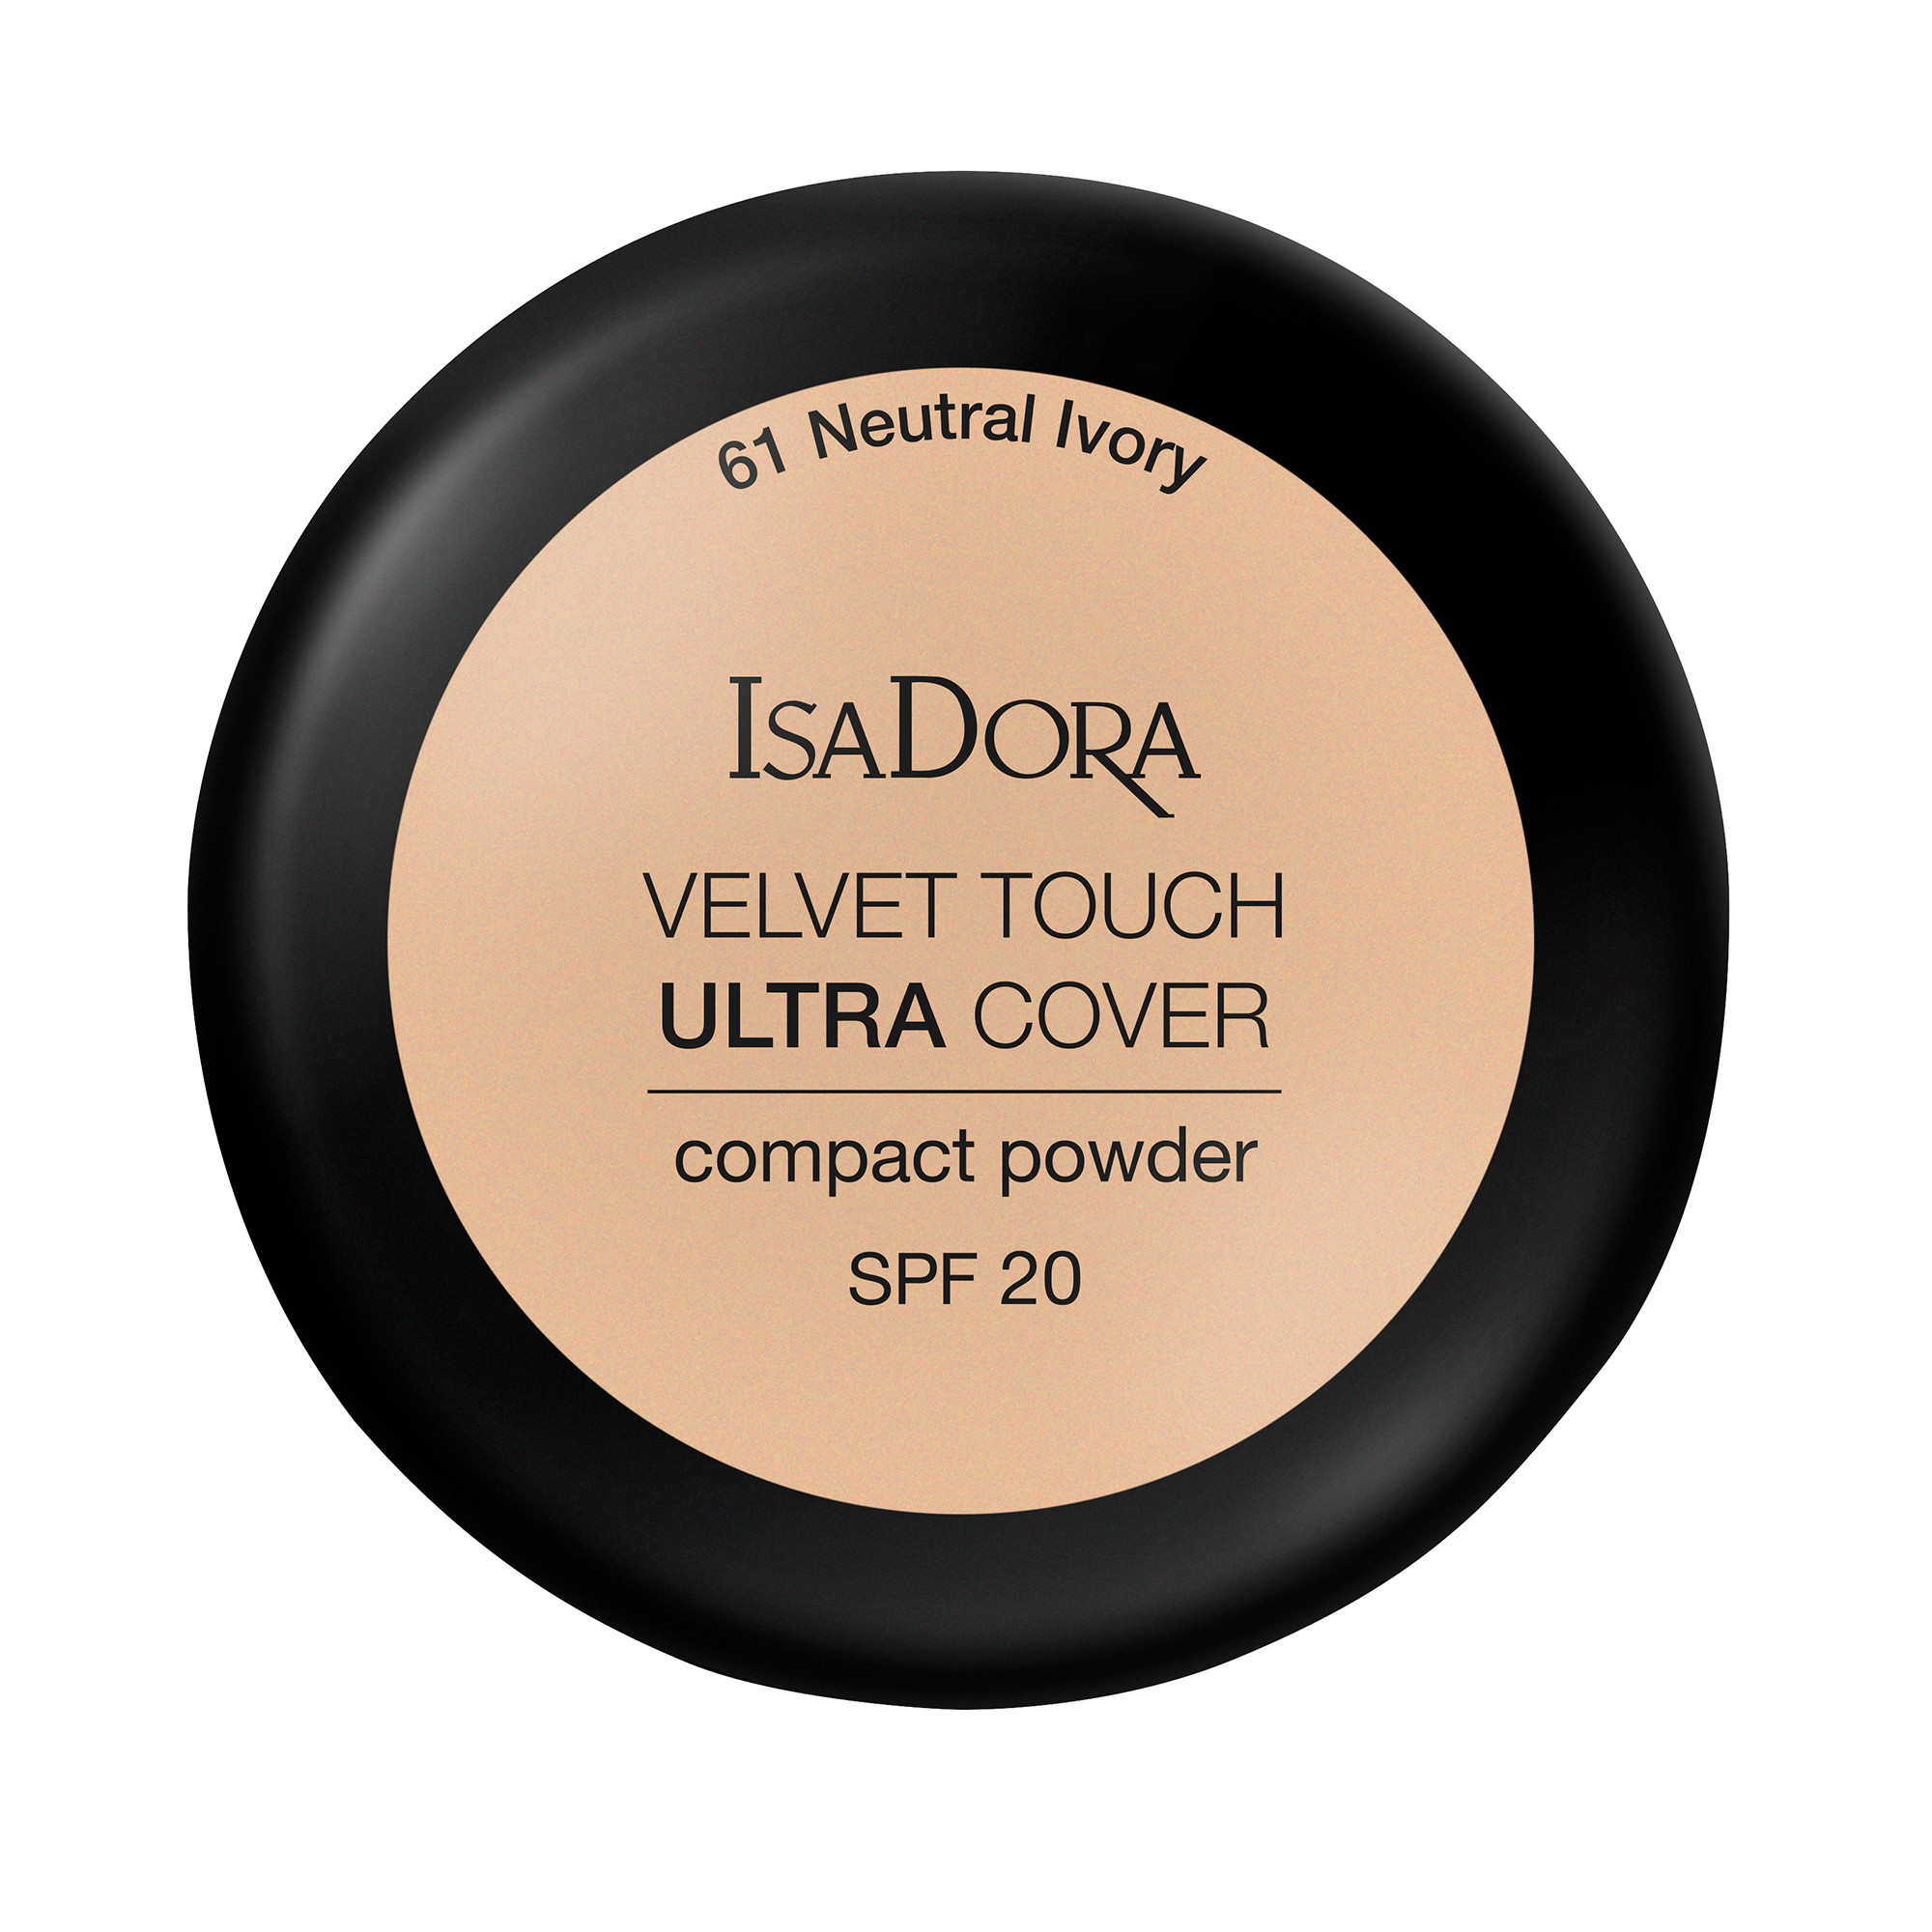 Image of Velvet Touch Ultra Cover Compact Powder SPF 20 - 61 Neutral Ivory ISADORA